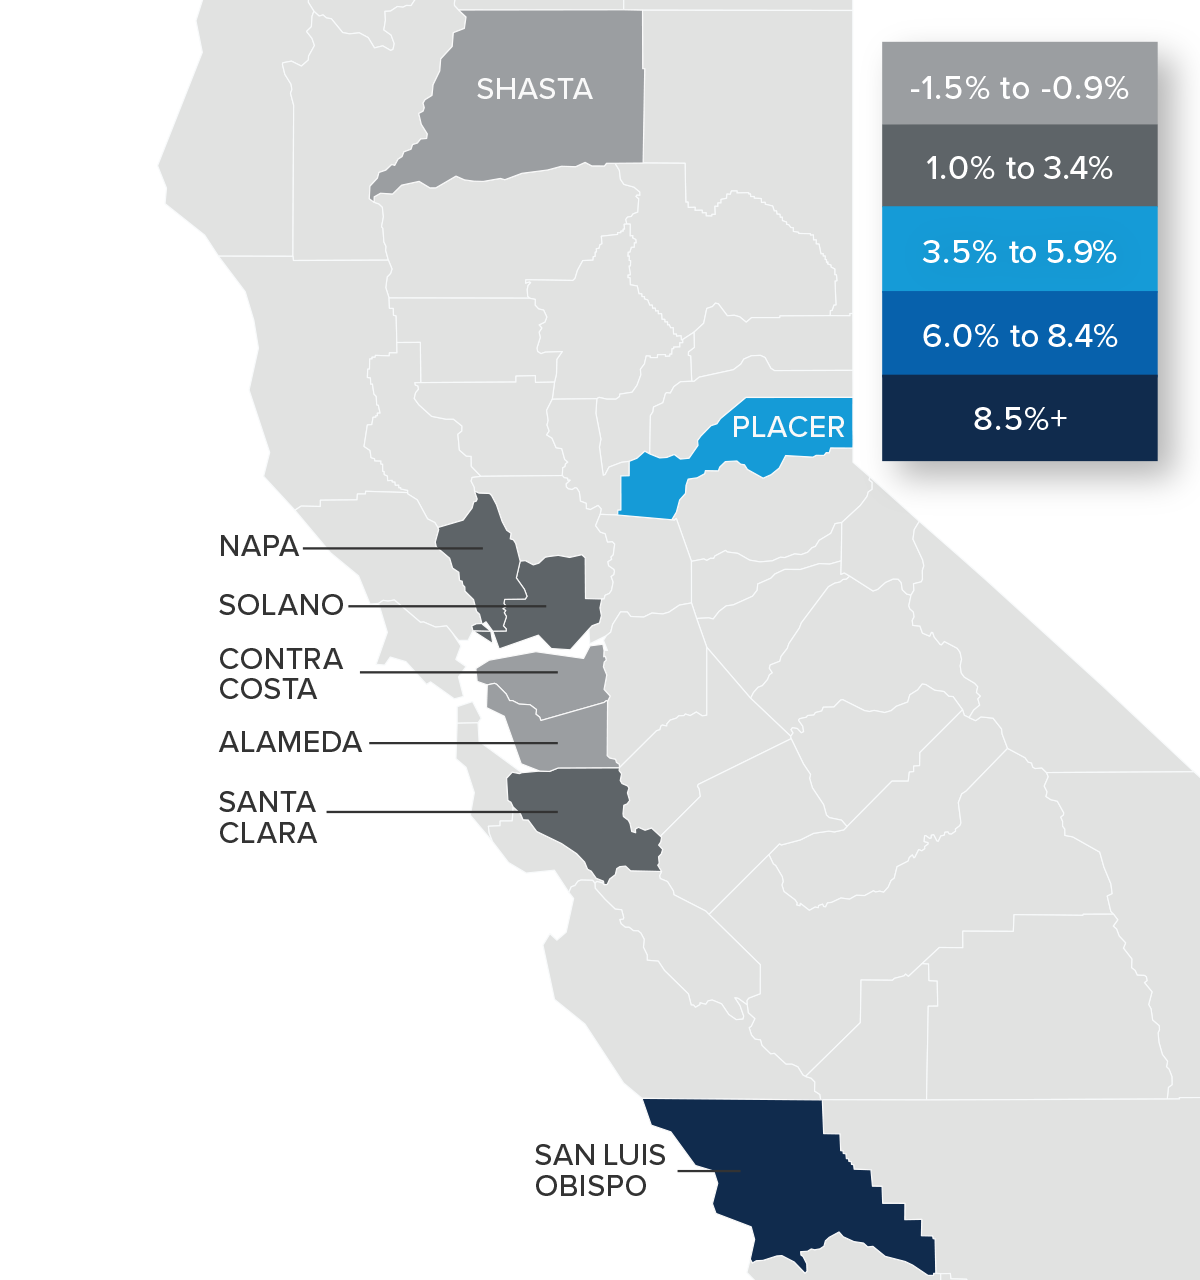 A map showing the real estate home prices percentage changes for various counties in Northern California. Different colors correspond to different tiers of percentage change. Shasta, Contra Costa, and Alameda County are in the -1.5% to -0.9% range. Napa, Solano, and Santa Clara County have a percentage change in the 1% to 3.4% range, Placer is in the 3.5% to 5.9% range, and San Luis Obispo is in the 8.5%+ range.